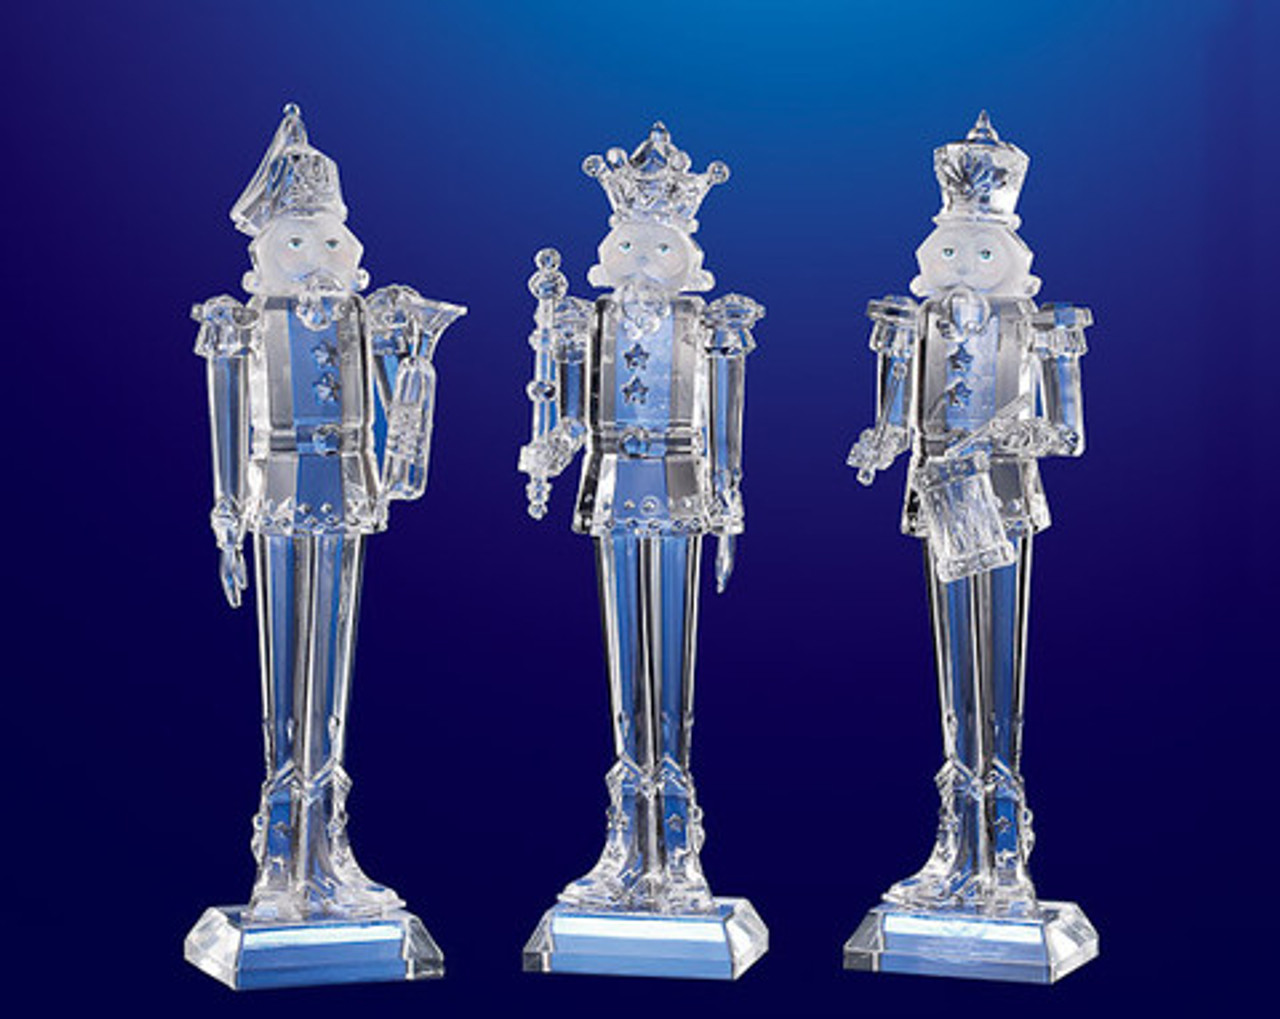 Pack of 6 Icy Crystal Decorative Christmas Nutcrackers 9"  Christmas